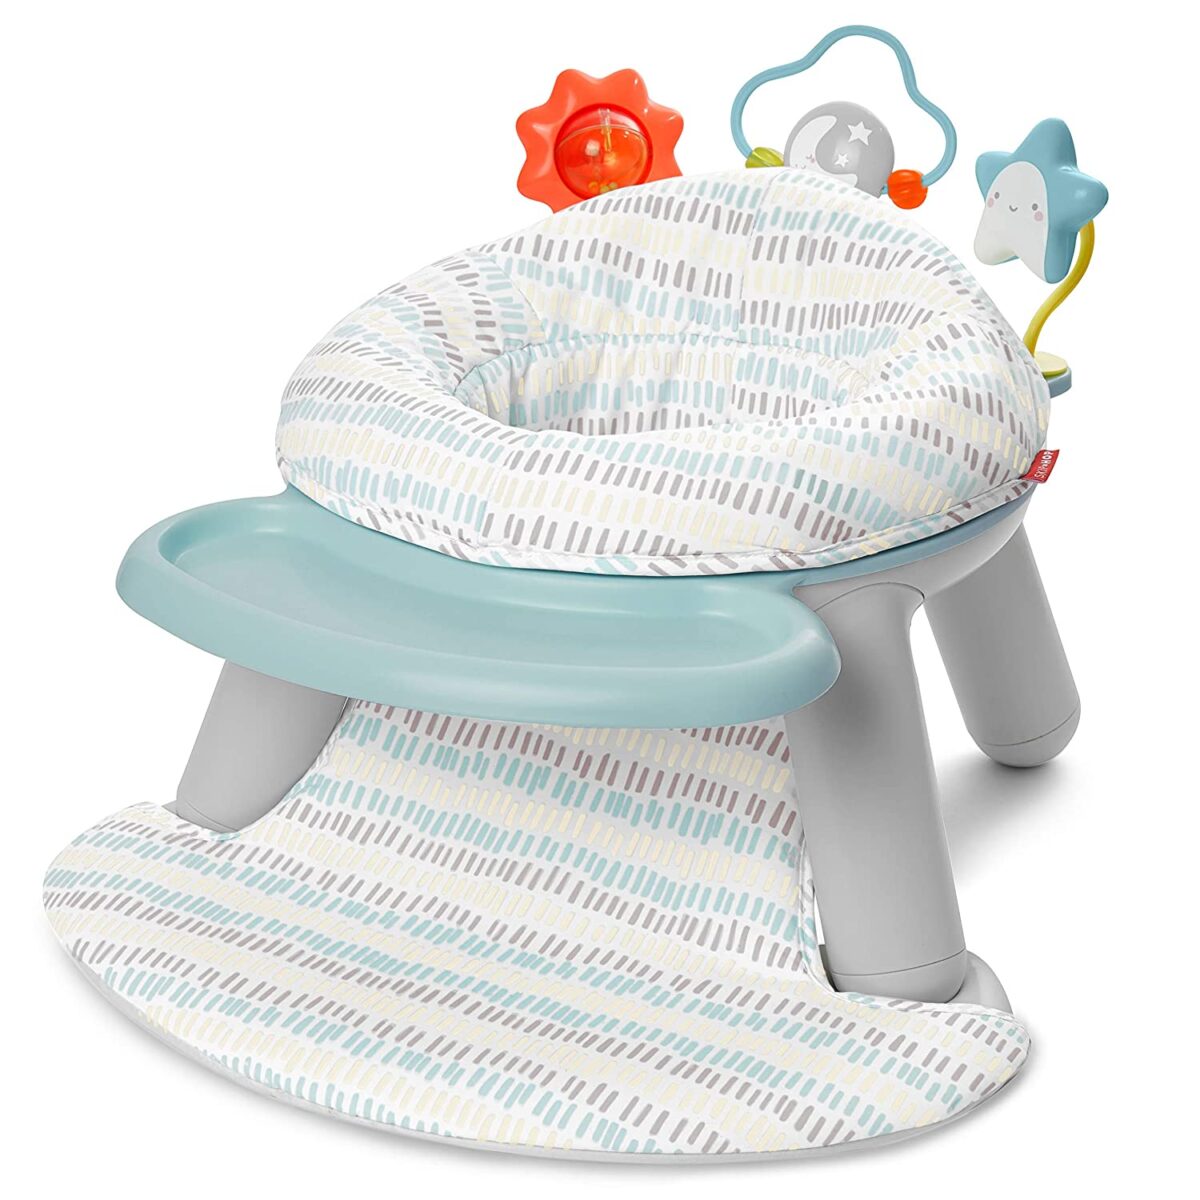 Skip Hop Silver Lining Cloud Baby Chair, 2-in-1 Sit-up Floor Seat & Infant Activity Seat